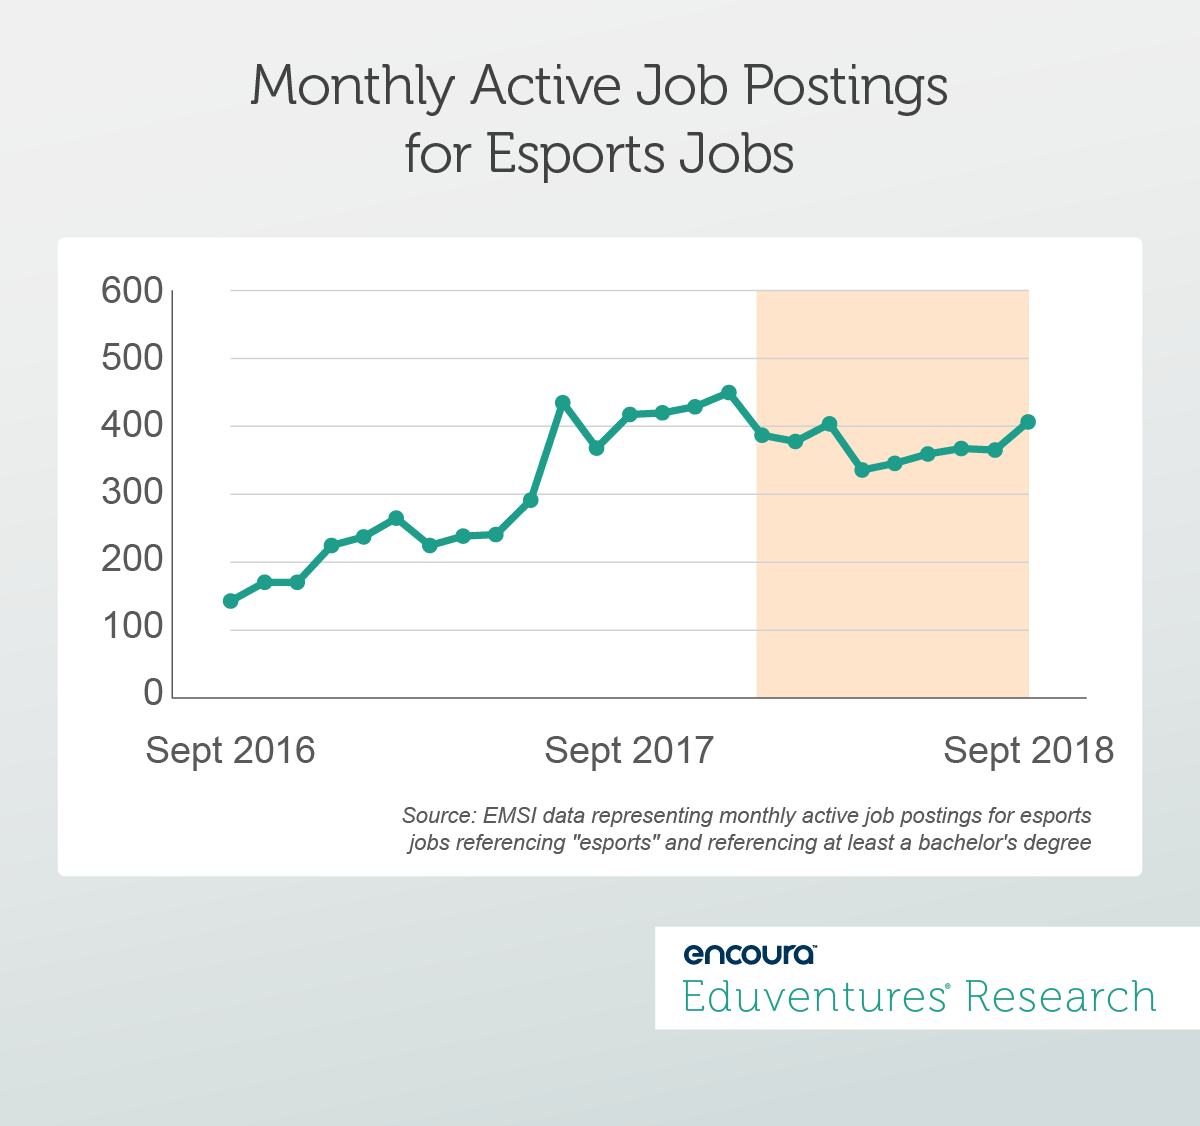 Monthly Active Job Postings for Esports Jobs